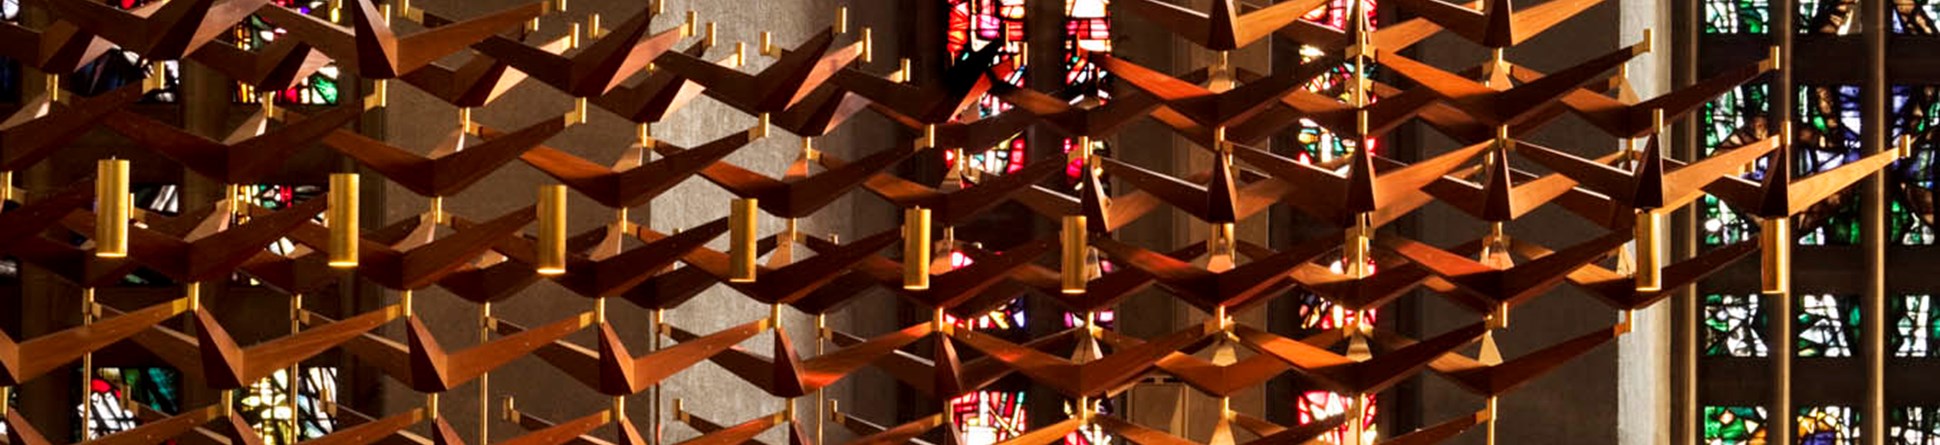 Detail of choir stalls and stained glass in Coventry Cathedral Church of St Michael